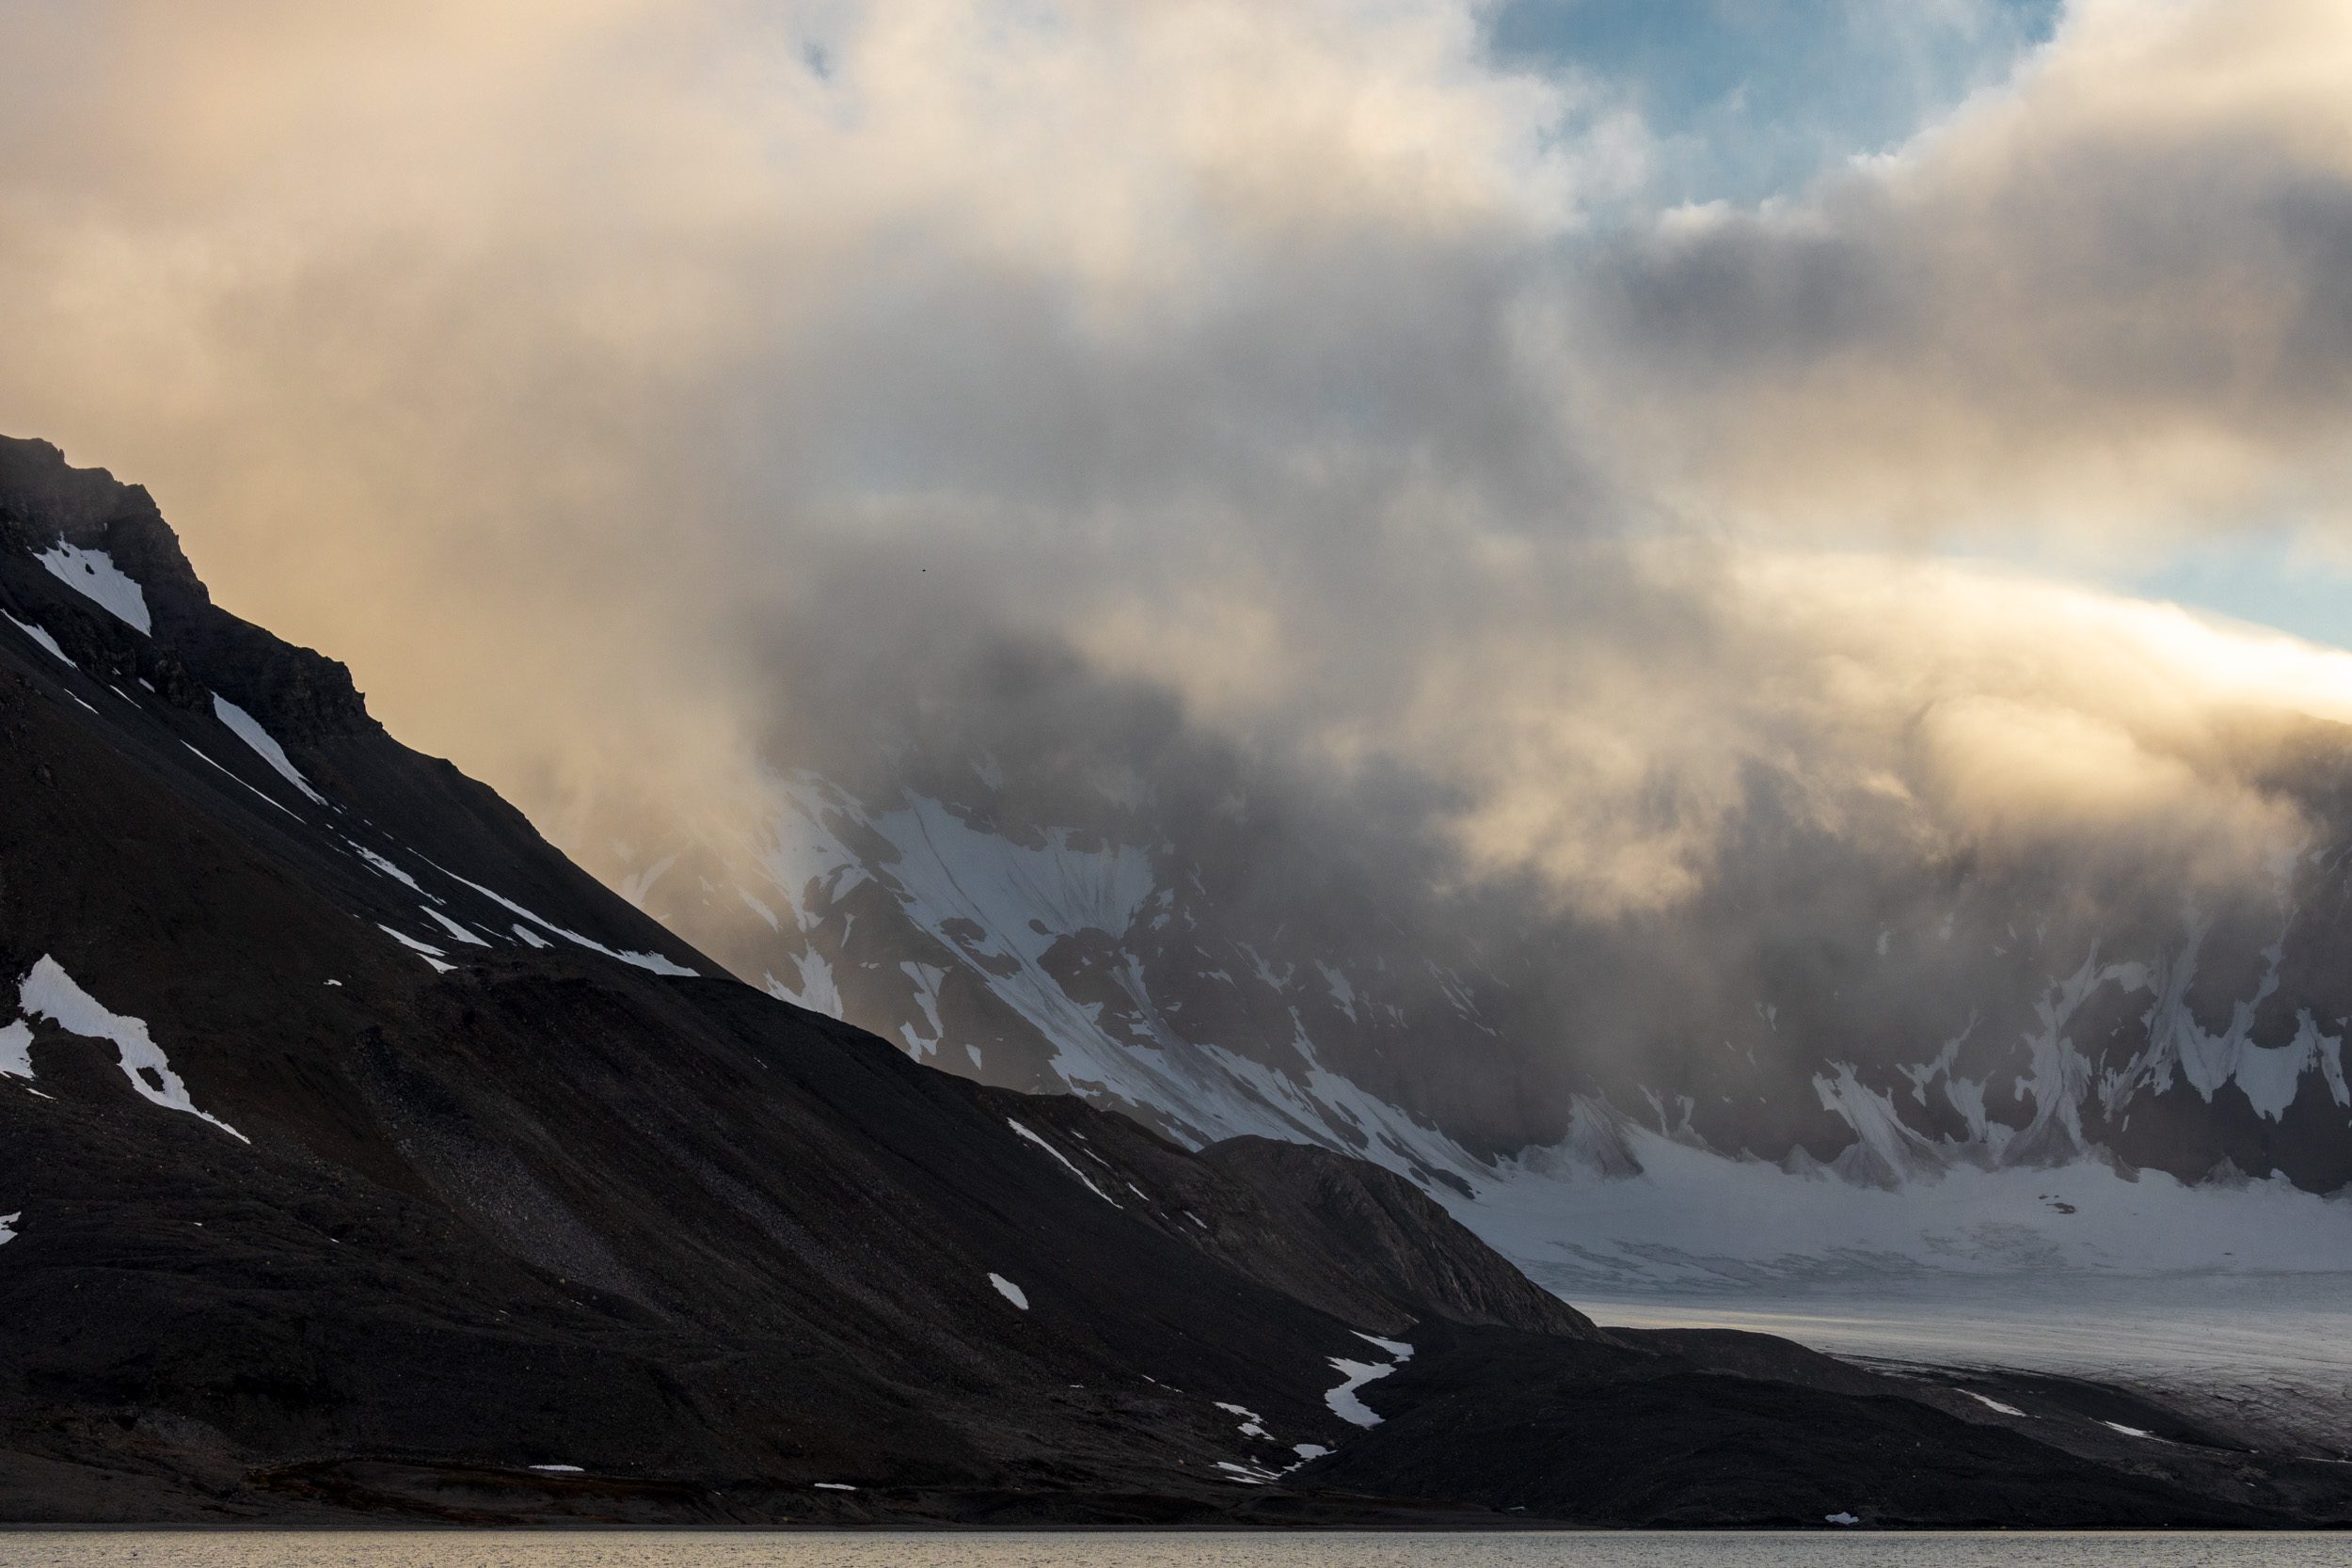 Sailing Expedition in the Svalbard Archipelago – Part 1